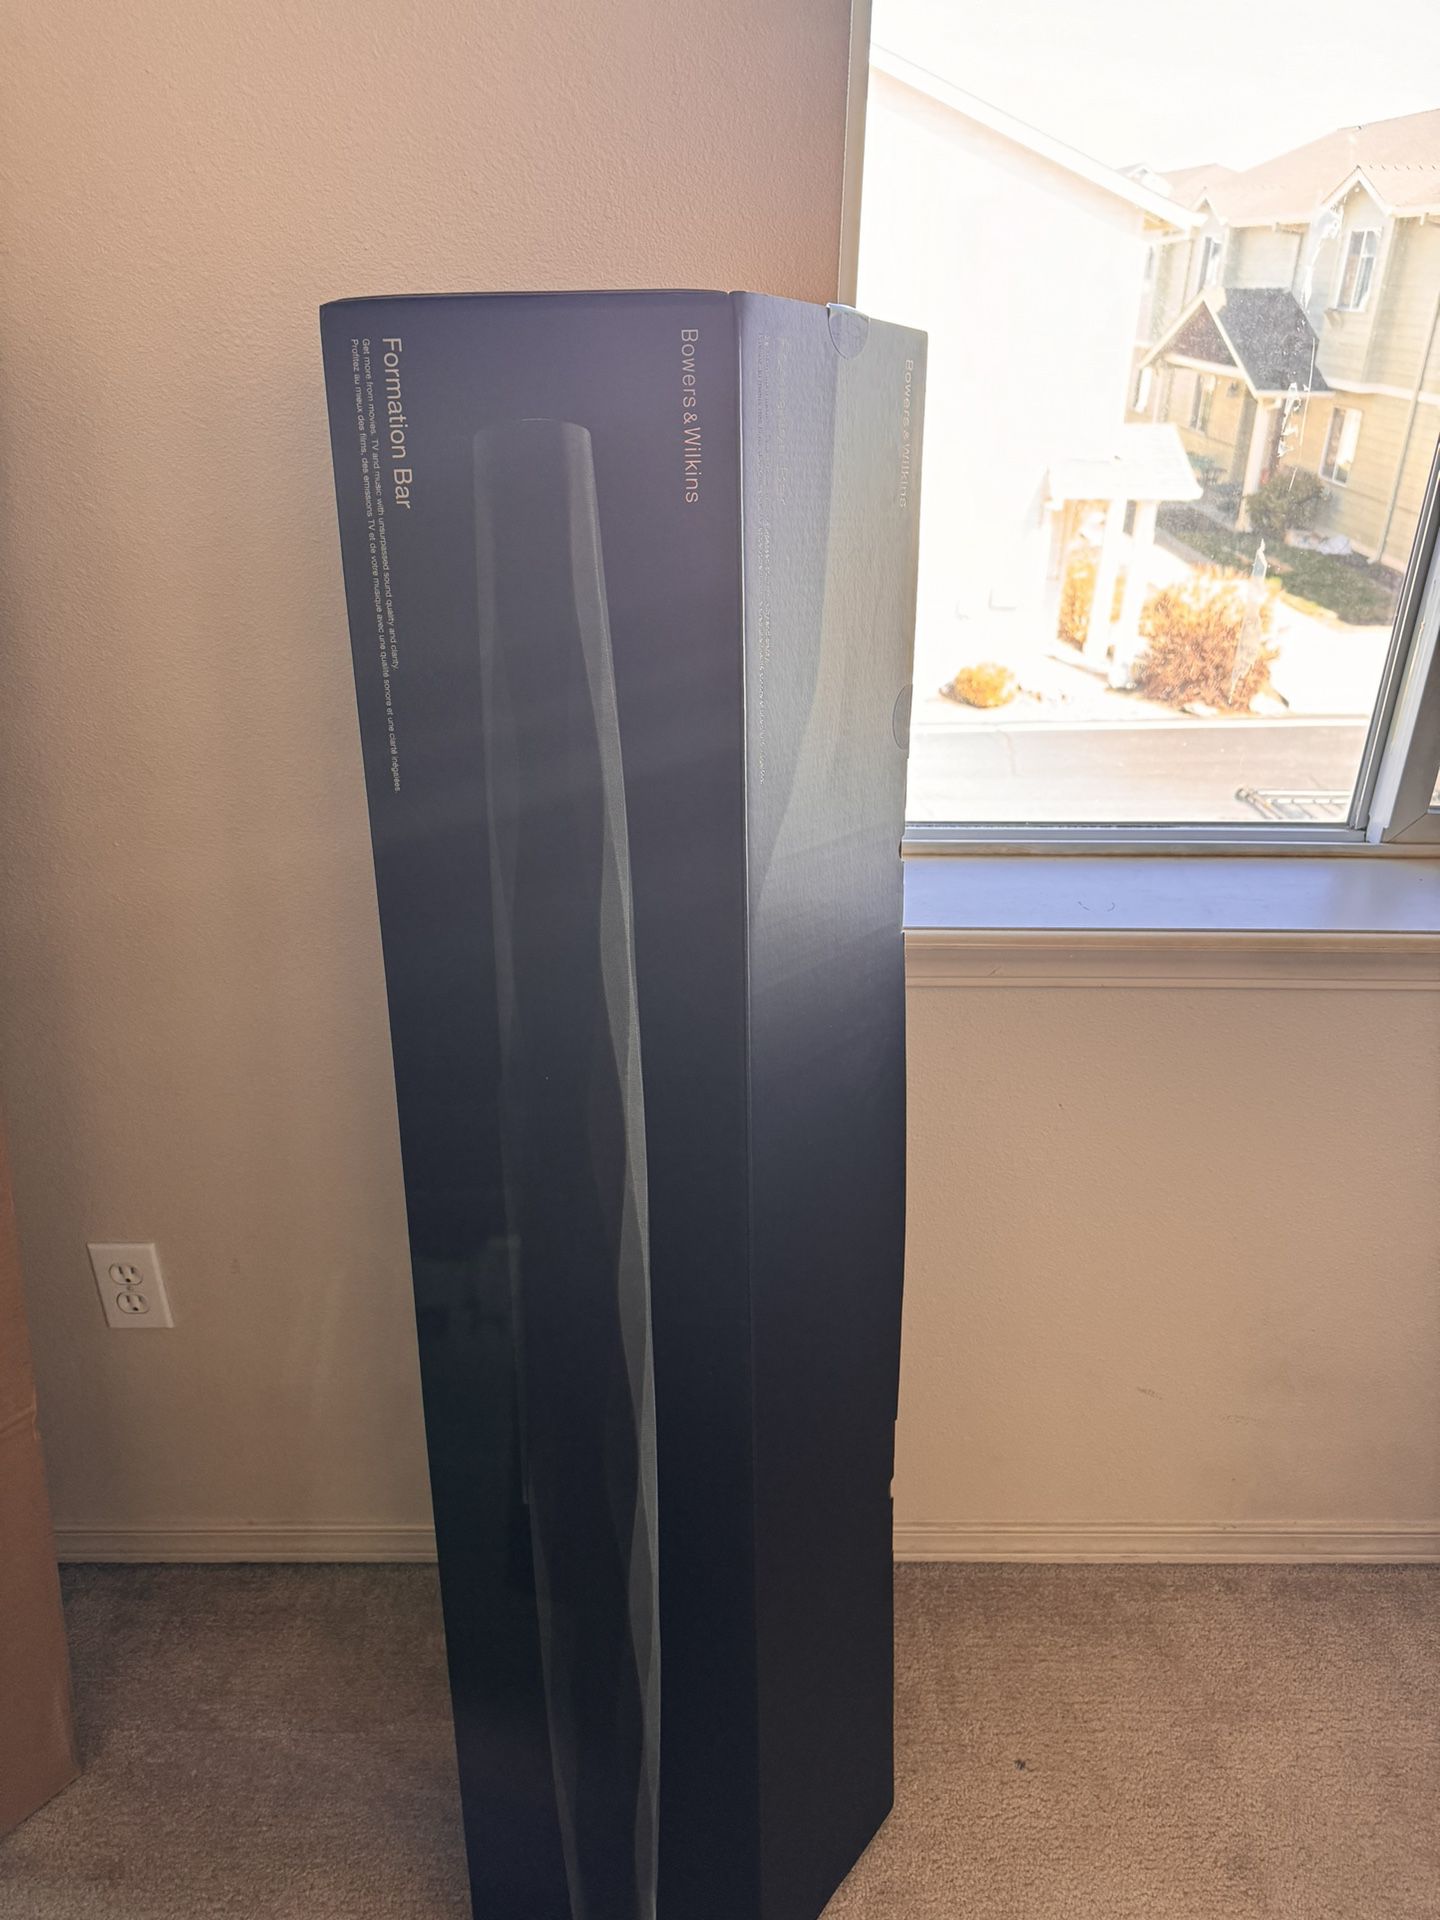 Bowers And Wilkins Soundbar And Subwoofer